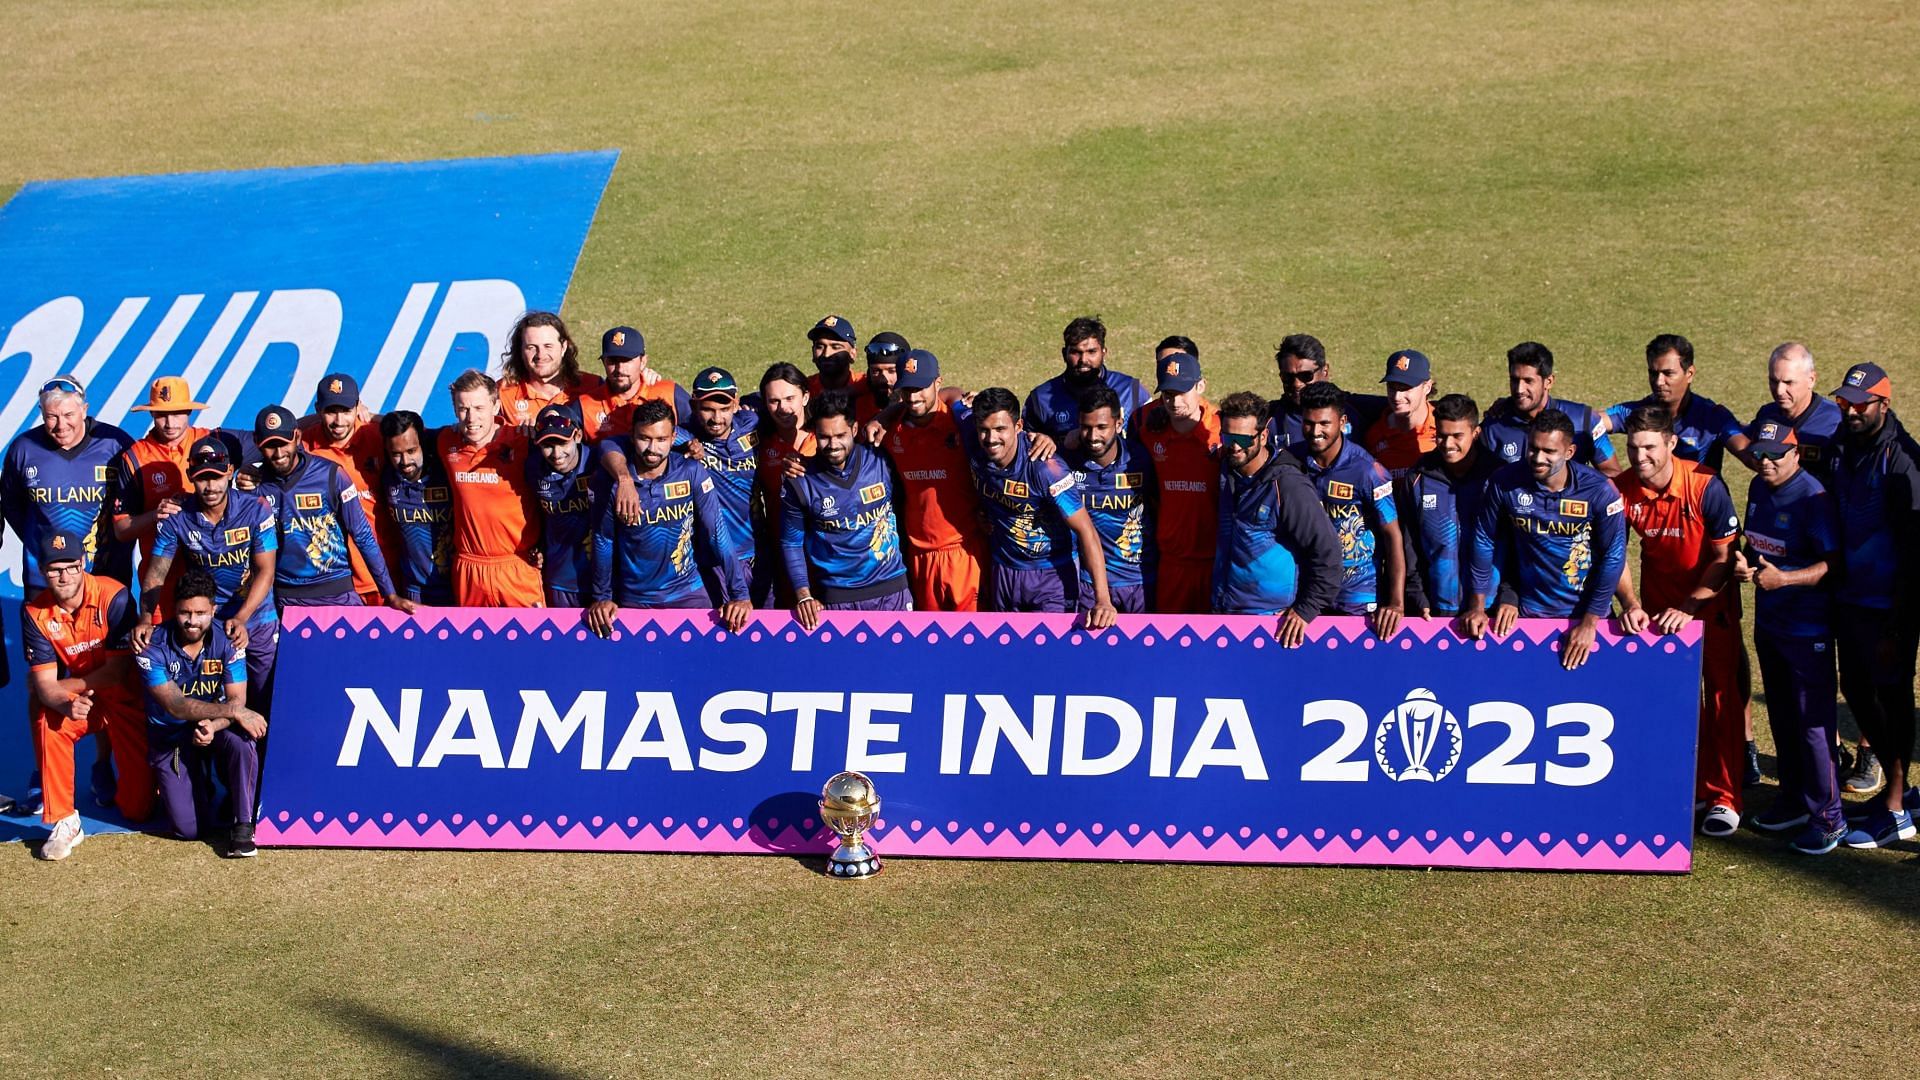 Sri Lanka beat Netherlands in the finals of the ICC World Cup Qualifiers 2023 [ICC]